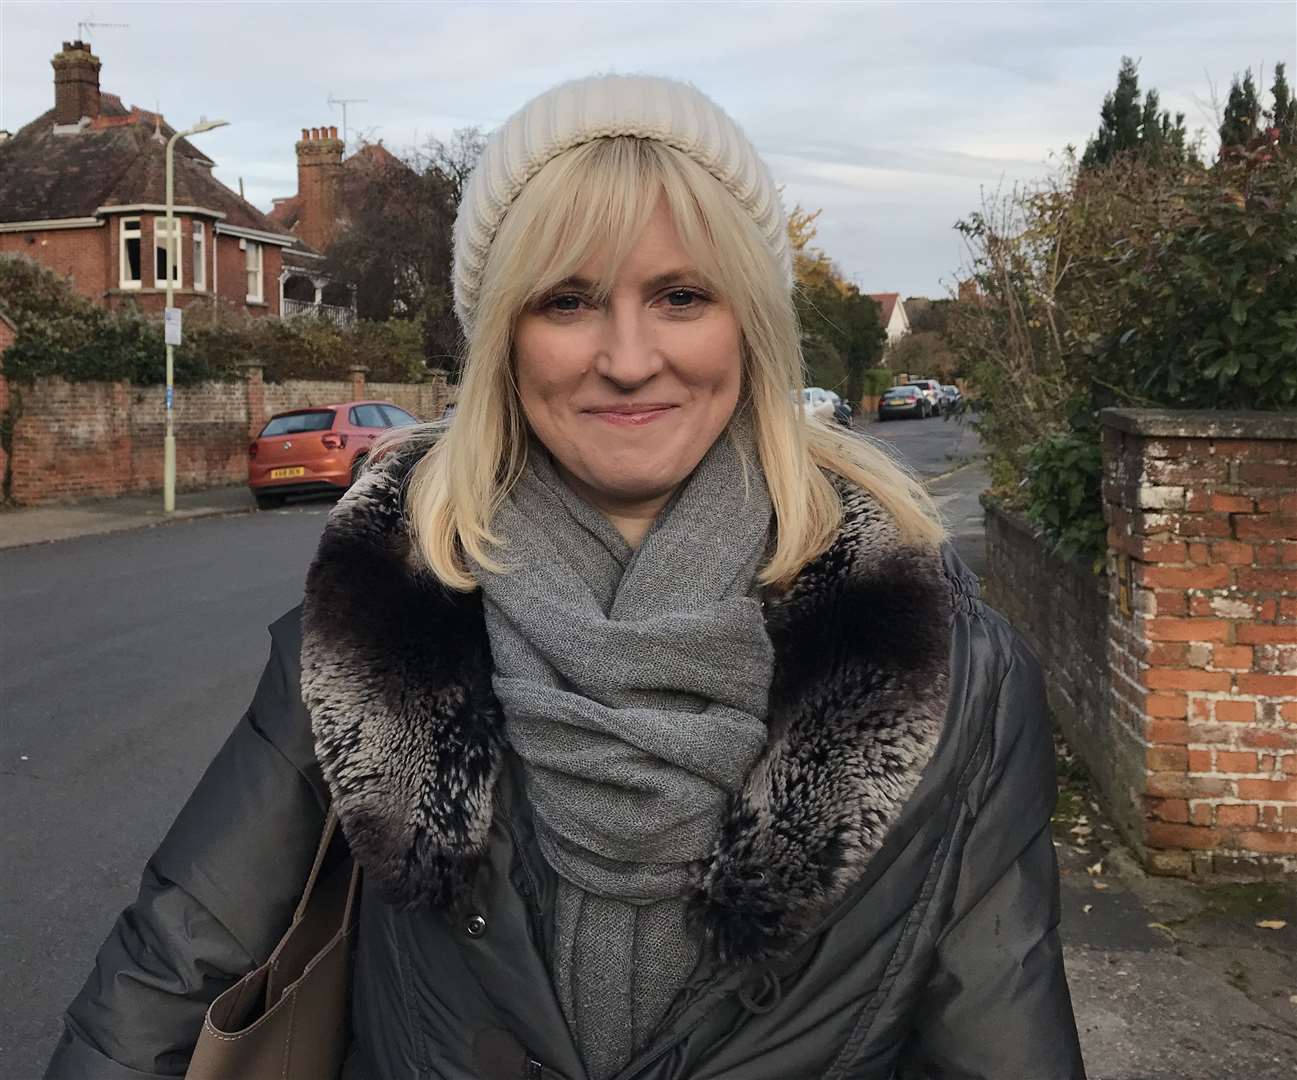 Rosie Duffield on the election campaign trail in 2019